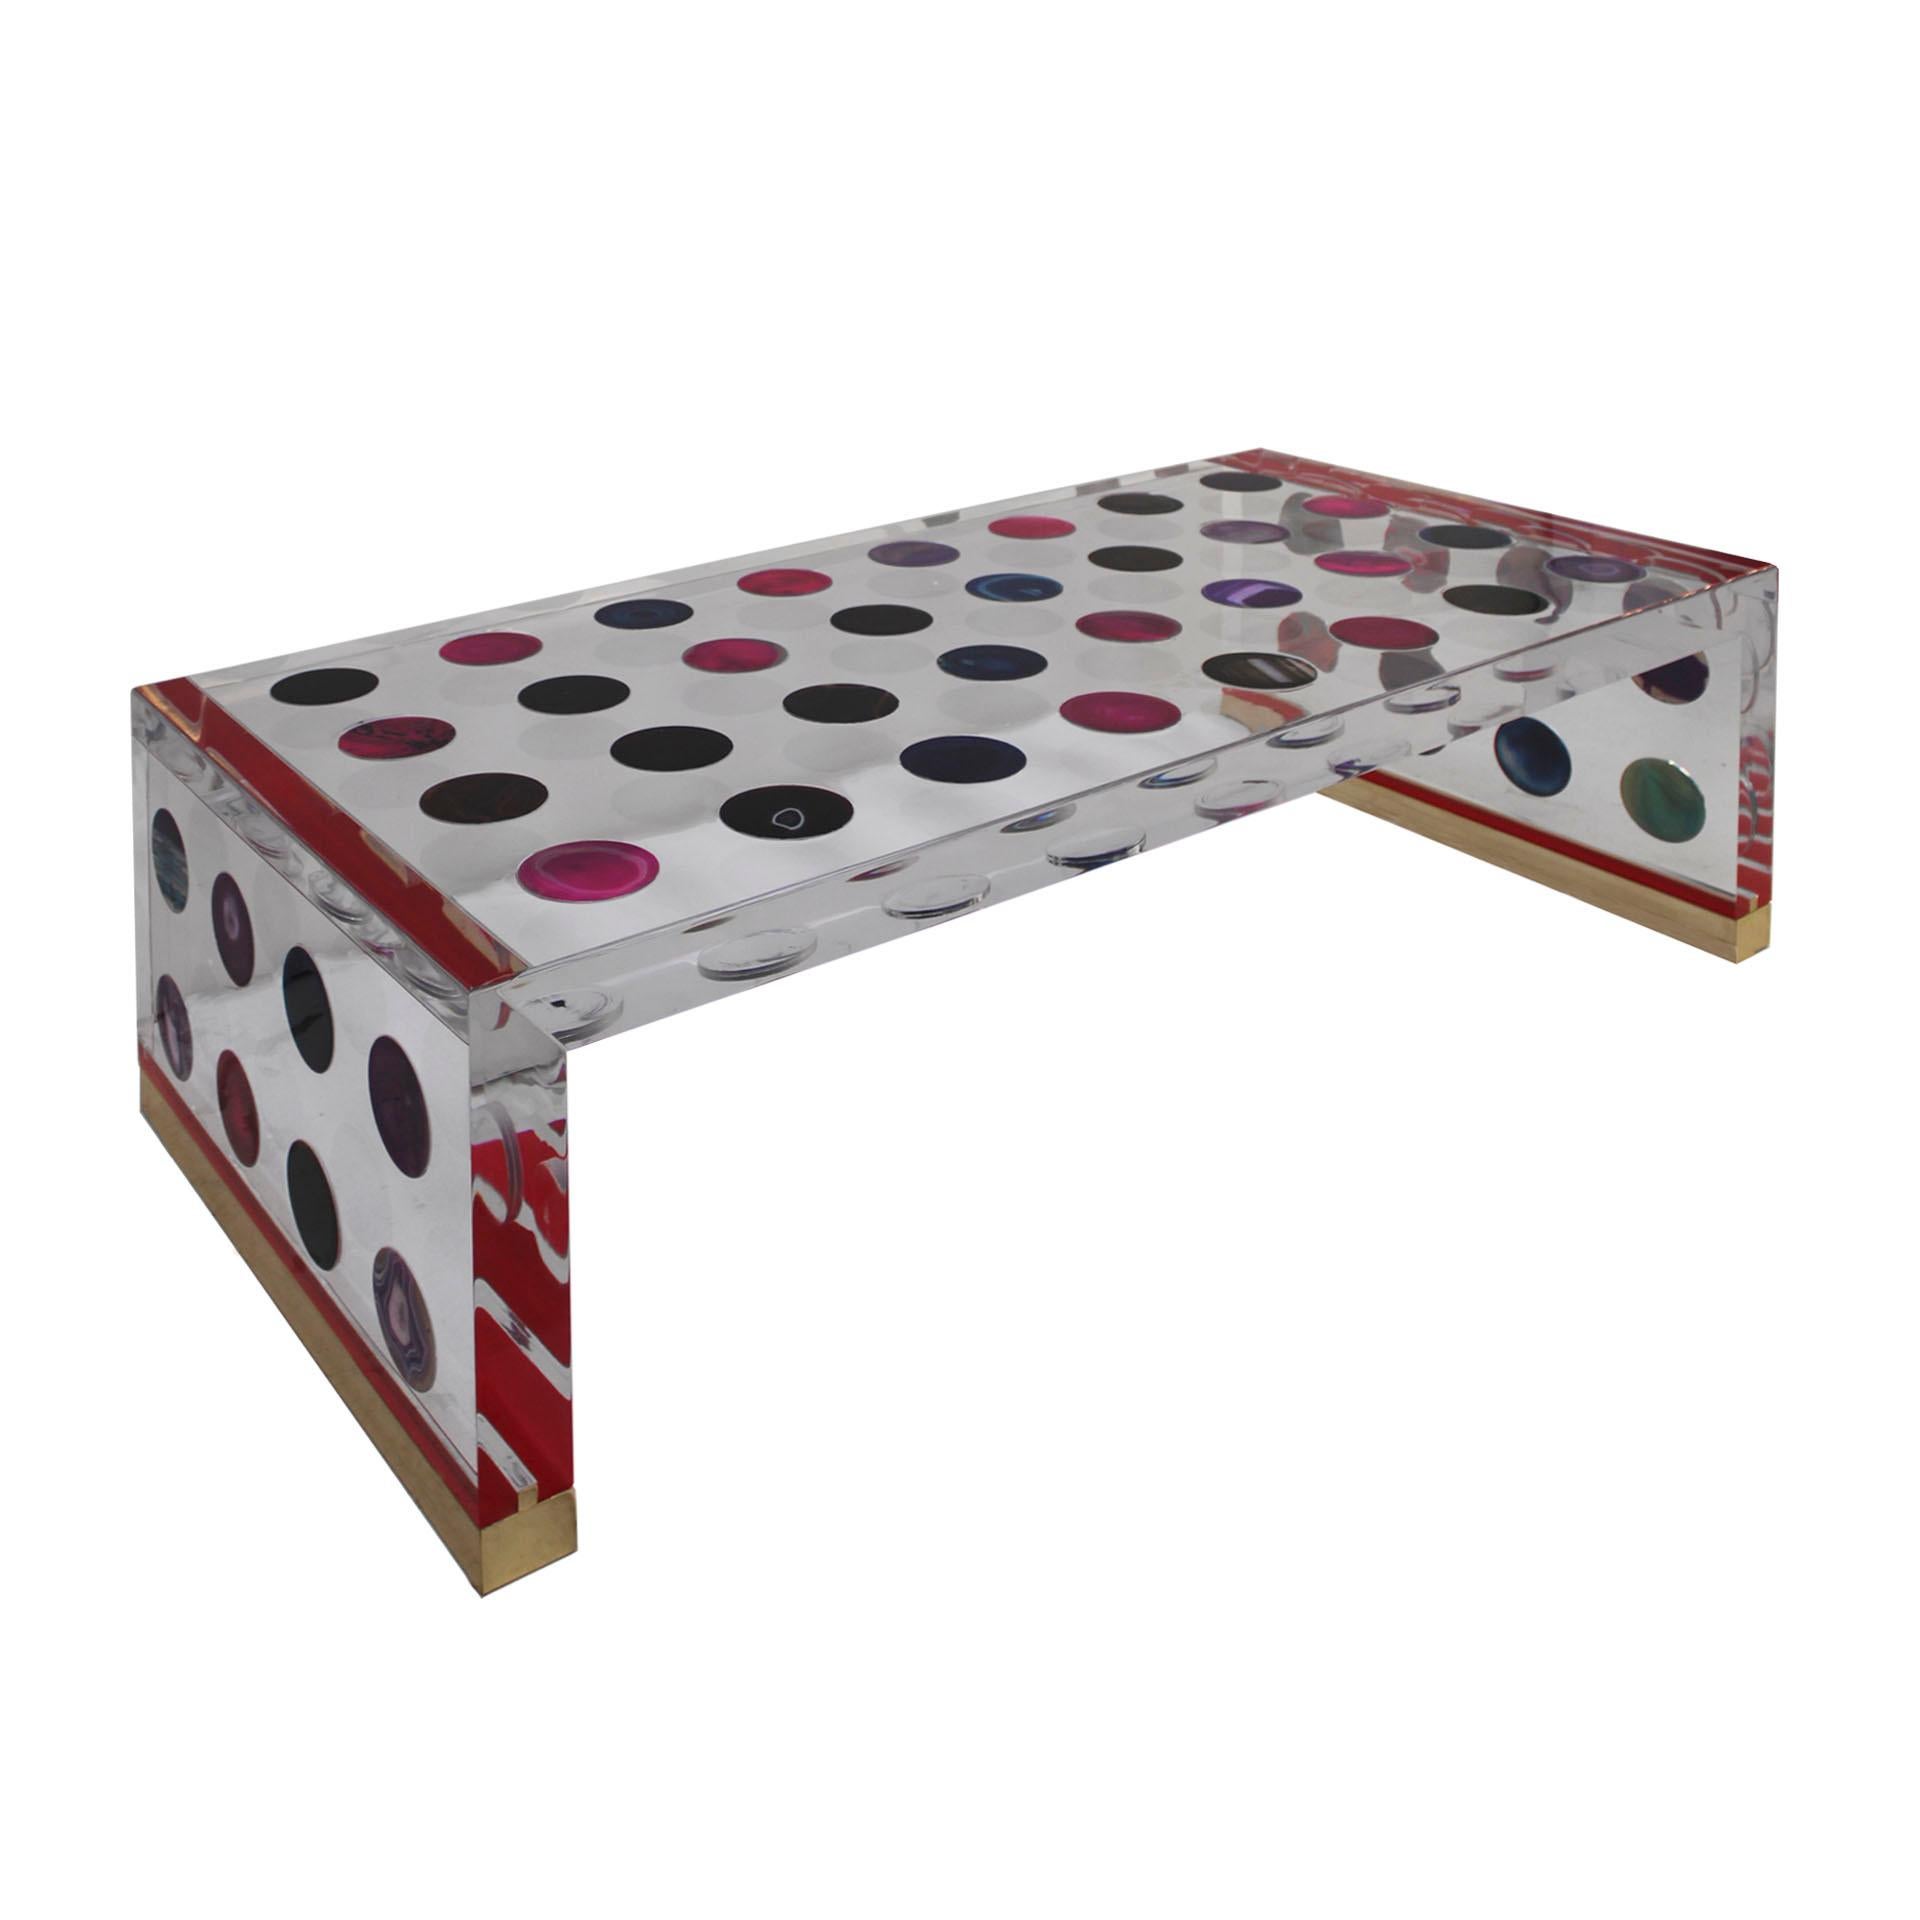 A stunning rectangular shape coffee table designed by Milanese Studio Superego. Made in plexiglas of ten centimeters thickness and surface inlaid decorated with agates. Brass finials on feet. Edition 1/1, Italy.

Agates are natural stones and